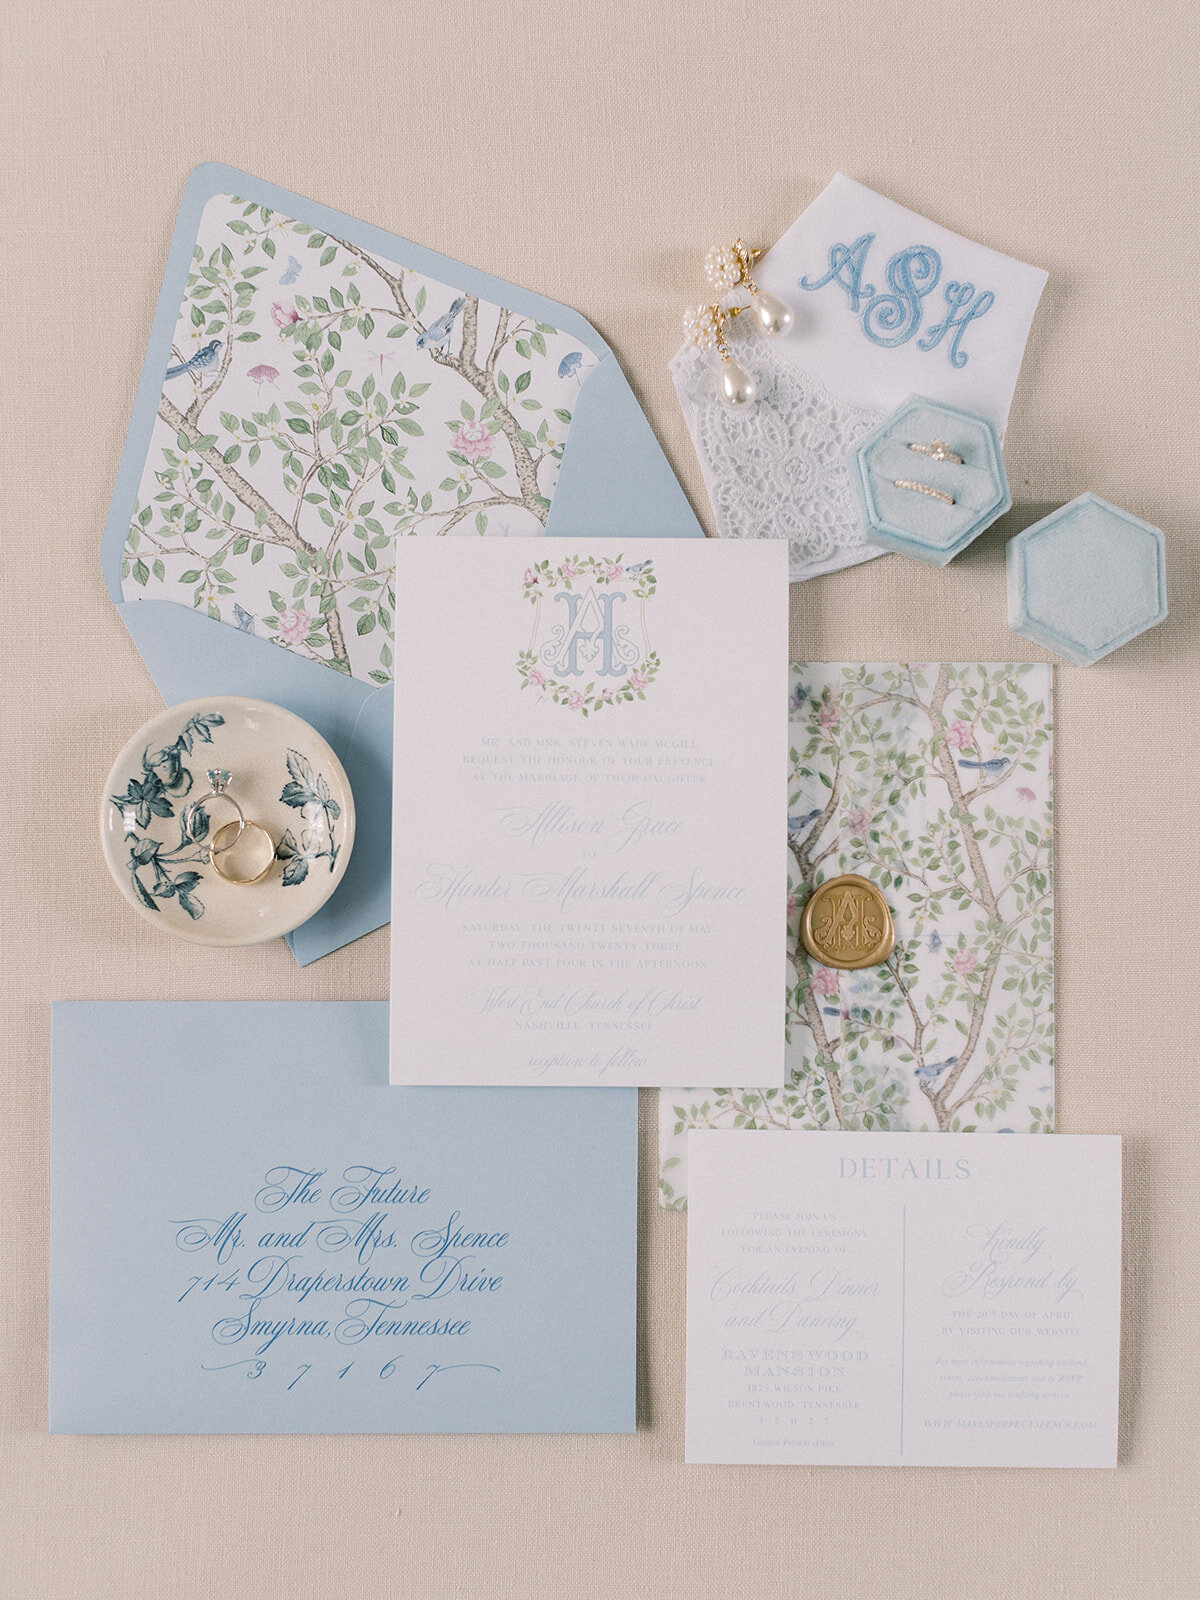 Floral pattern wedding invitations blue and pink